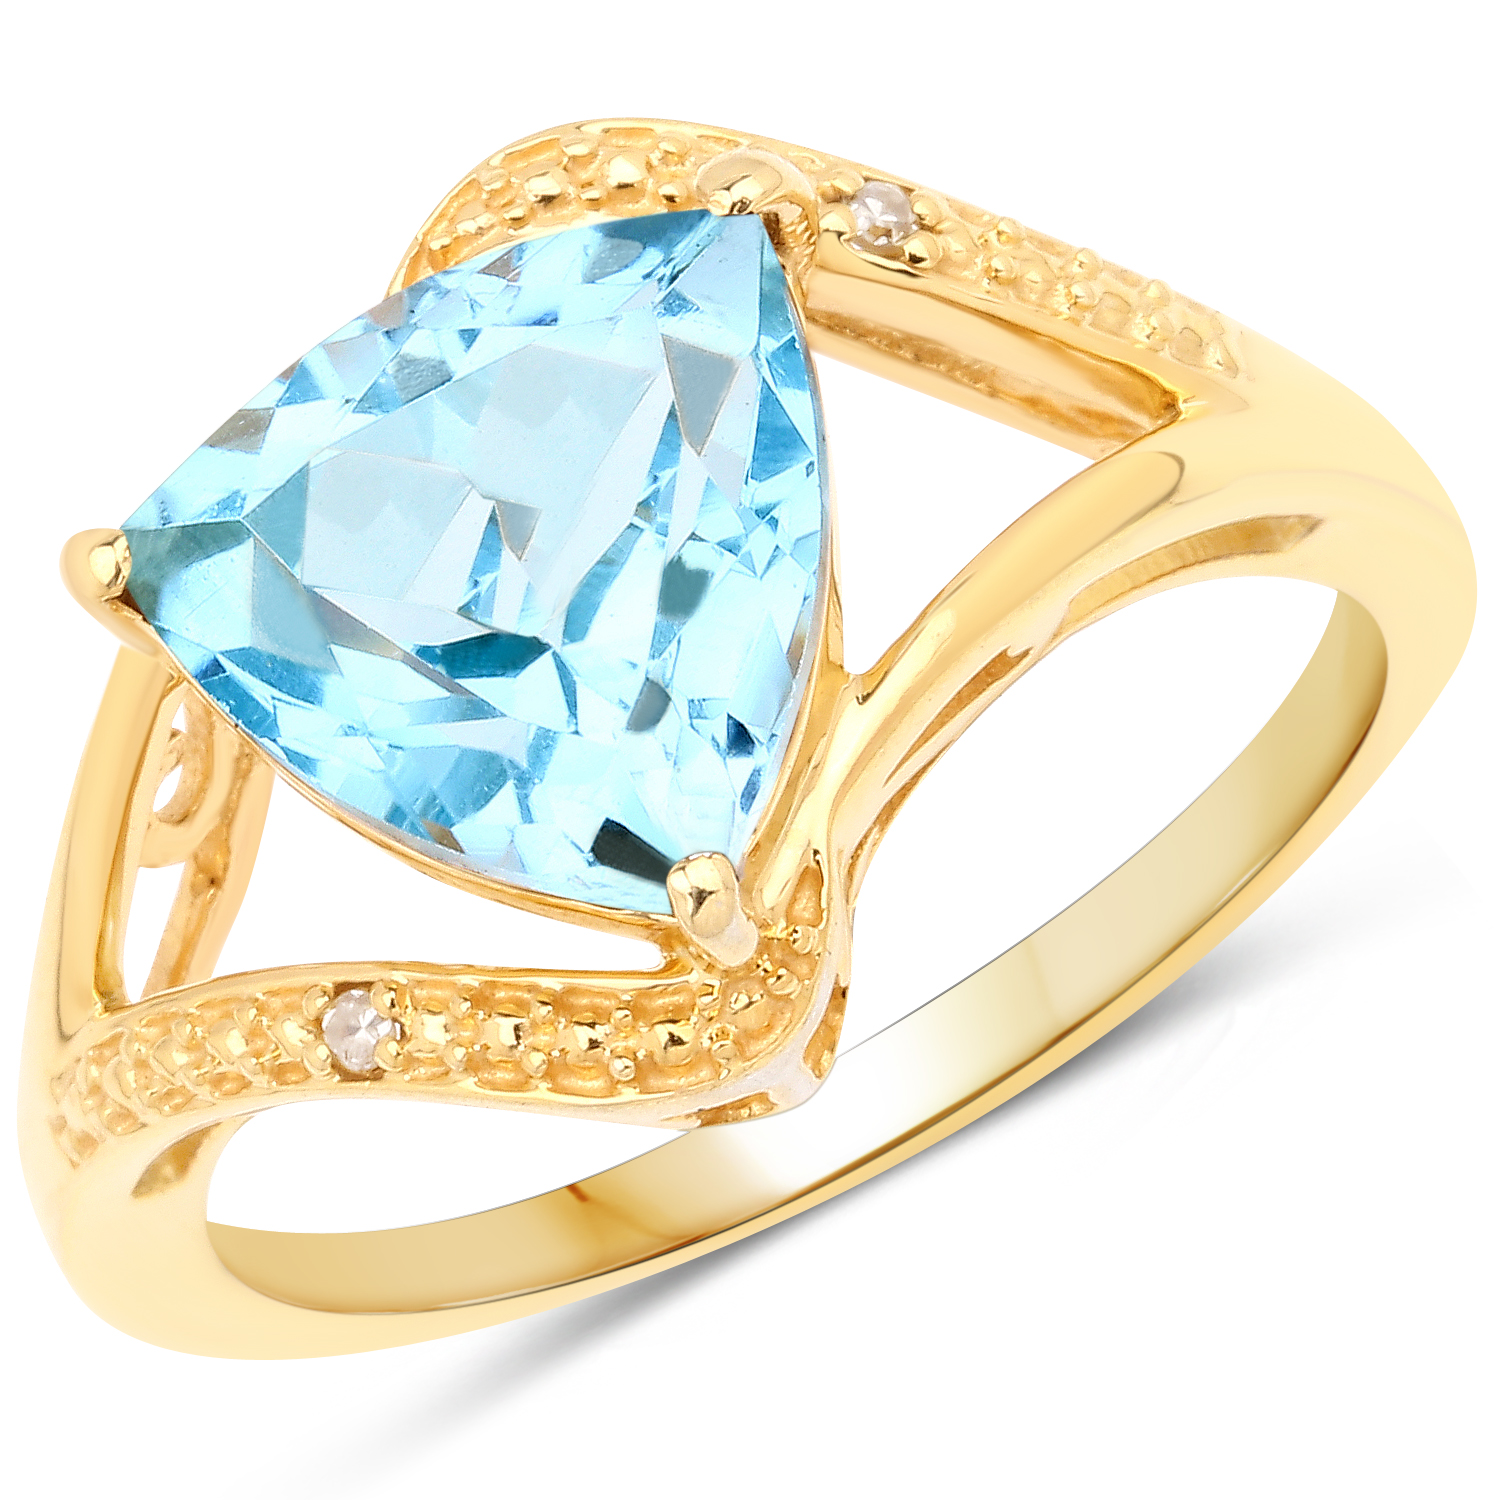 14K Yellow Gold Plated 2.76 Carat Genuine Blue Topaz and White 